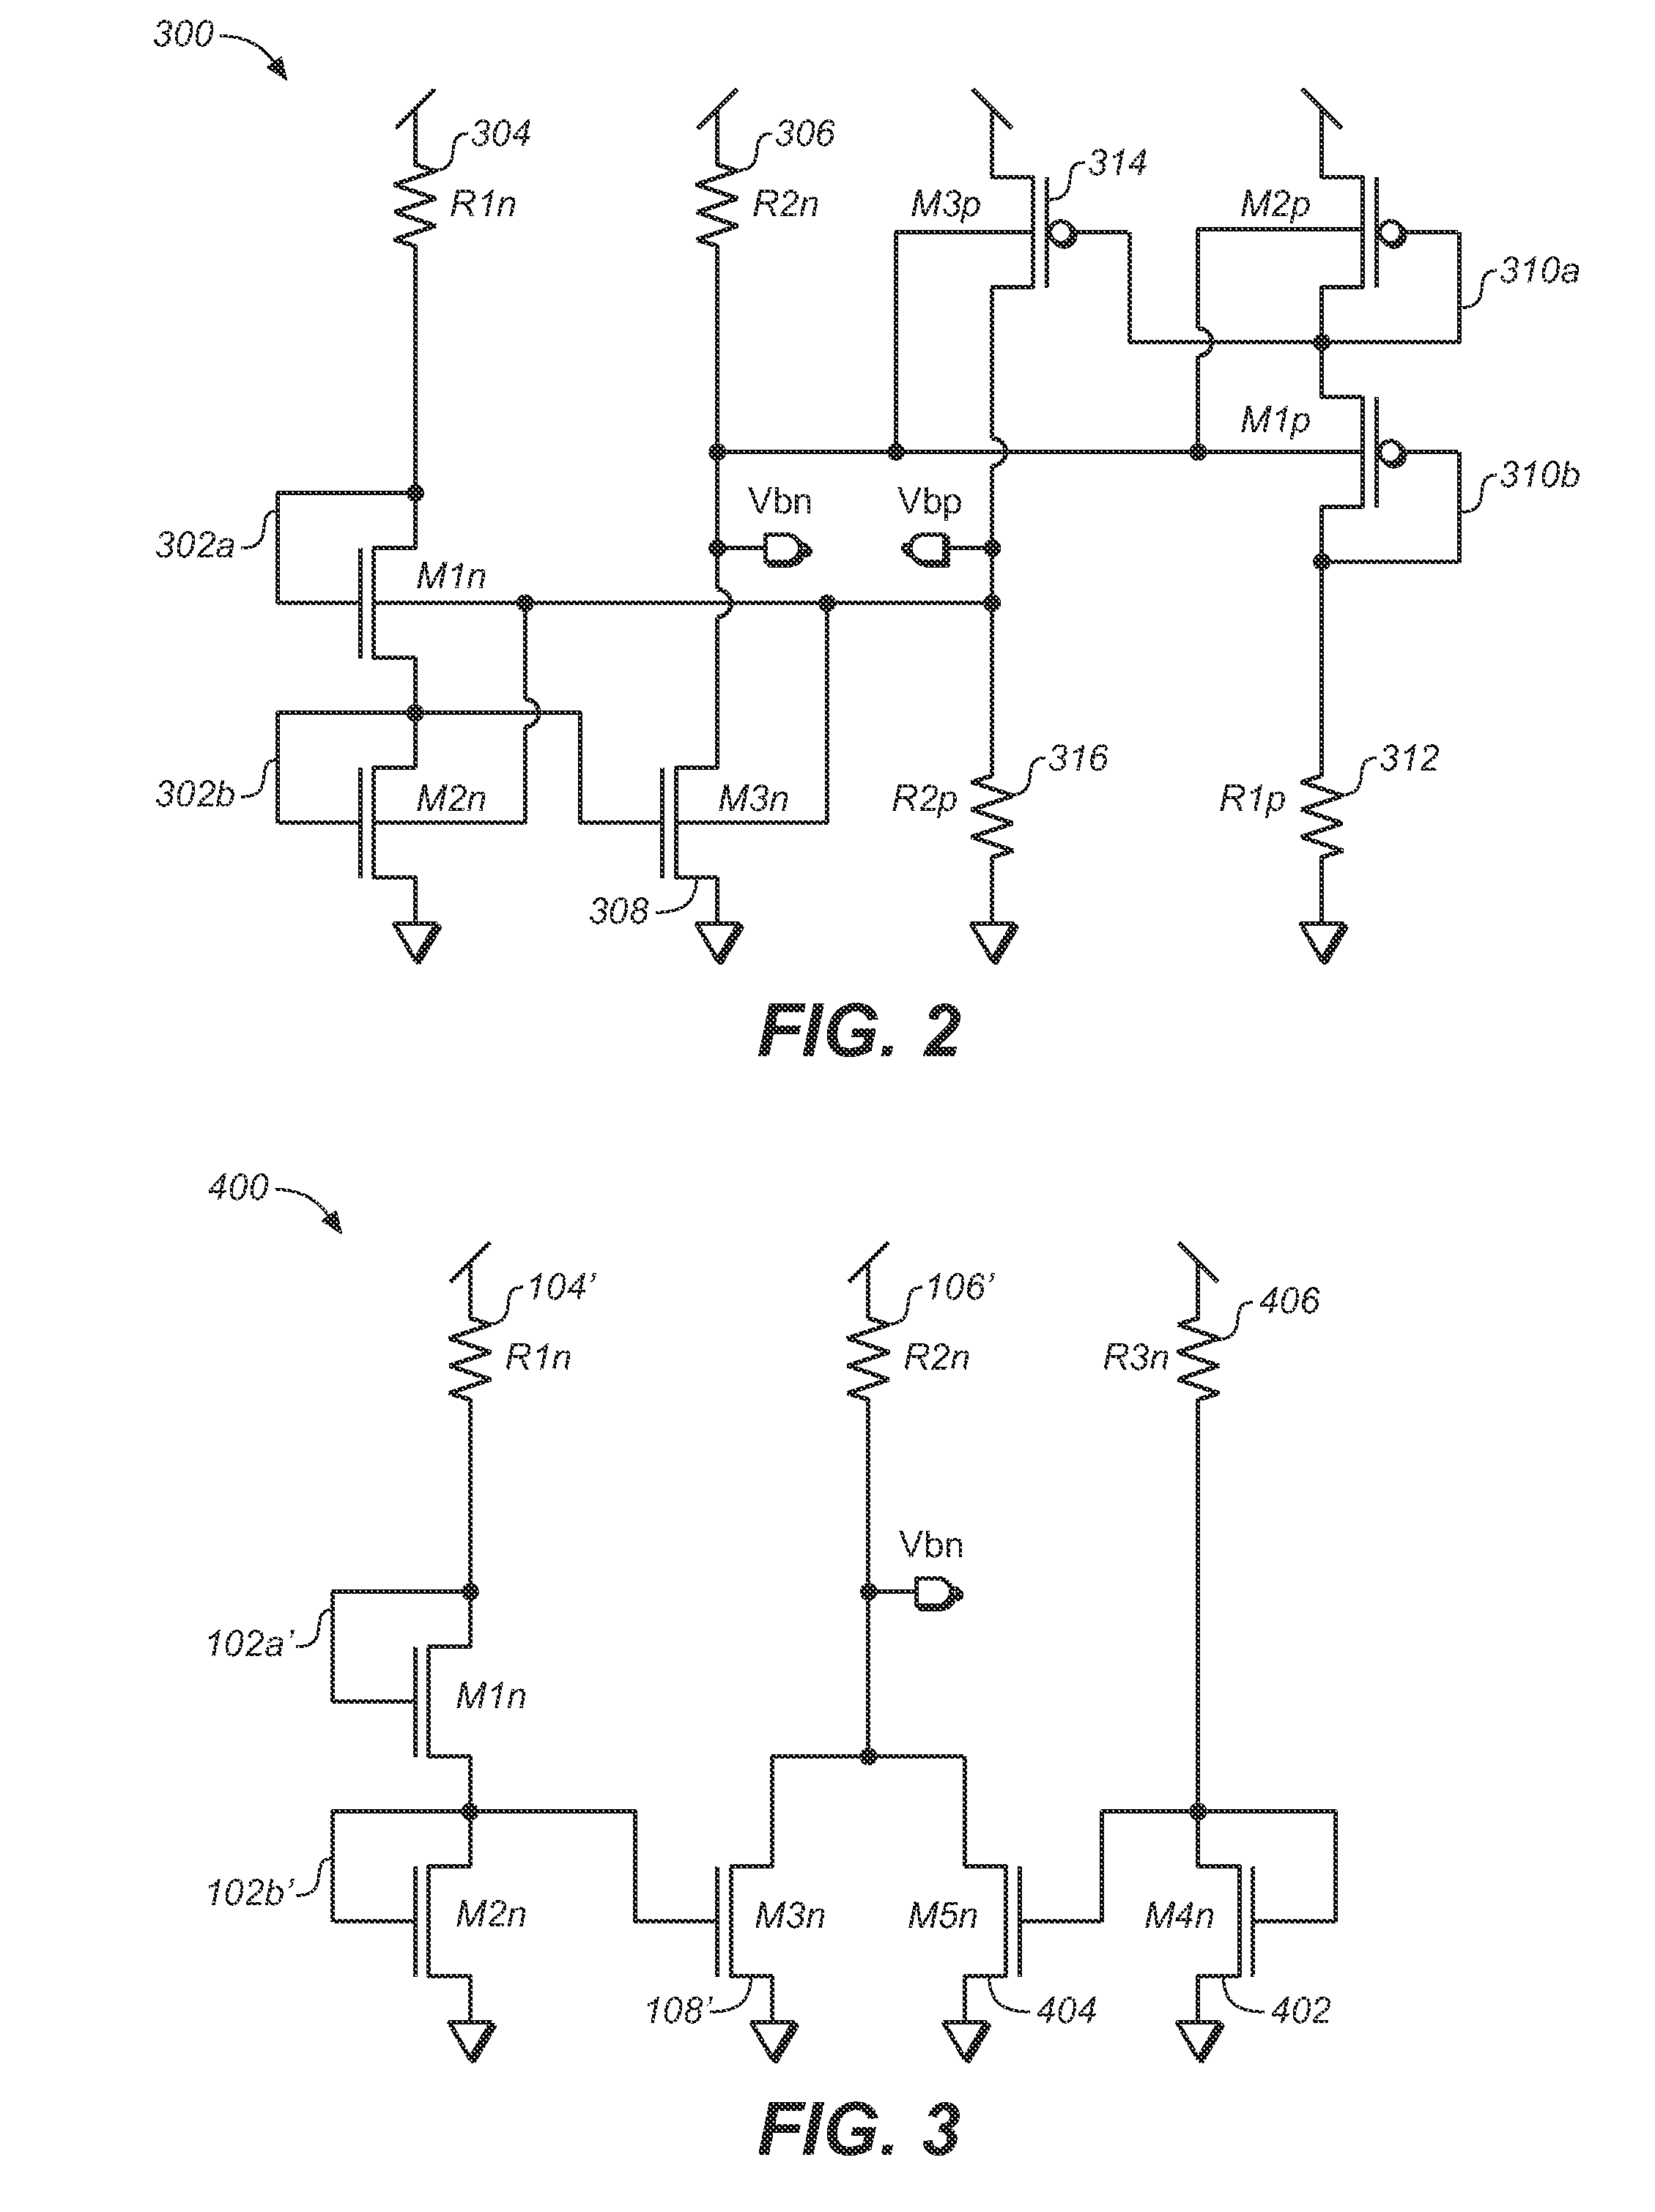 Bias circuit for a MOS device